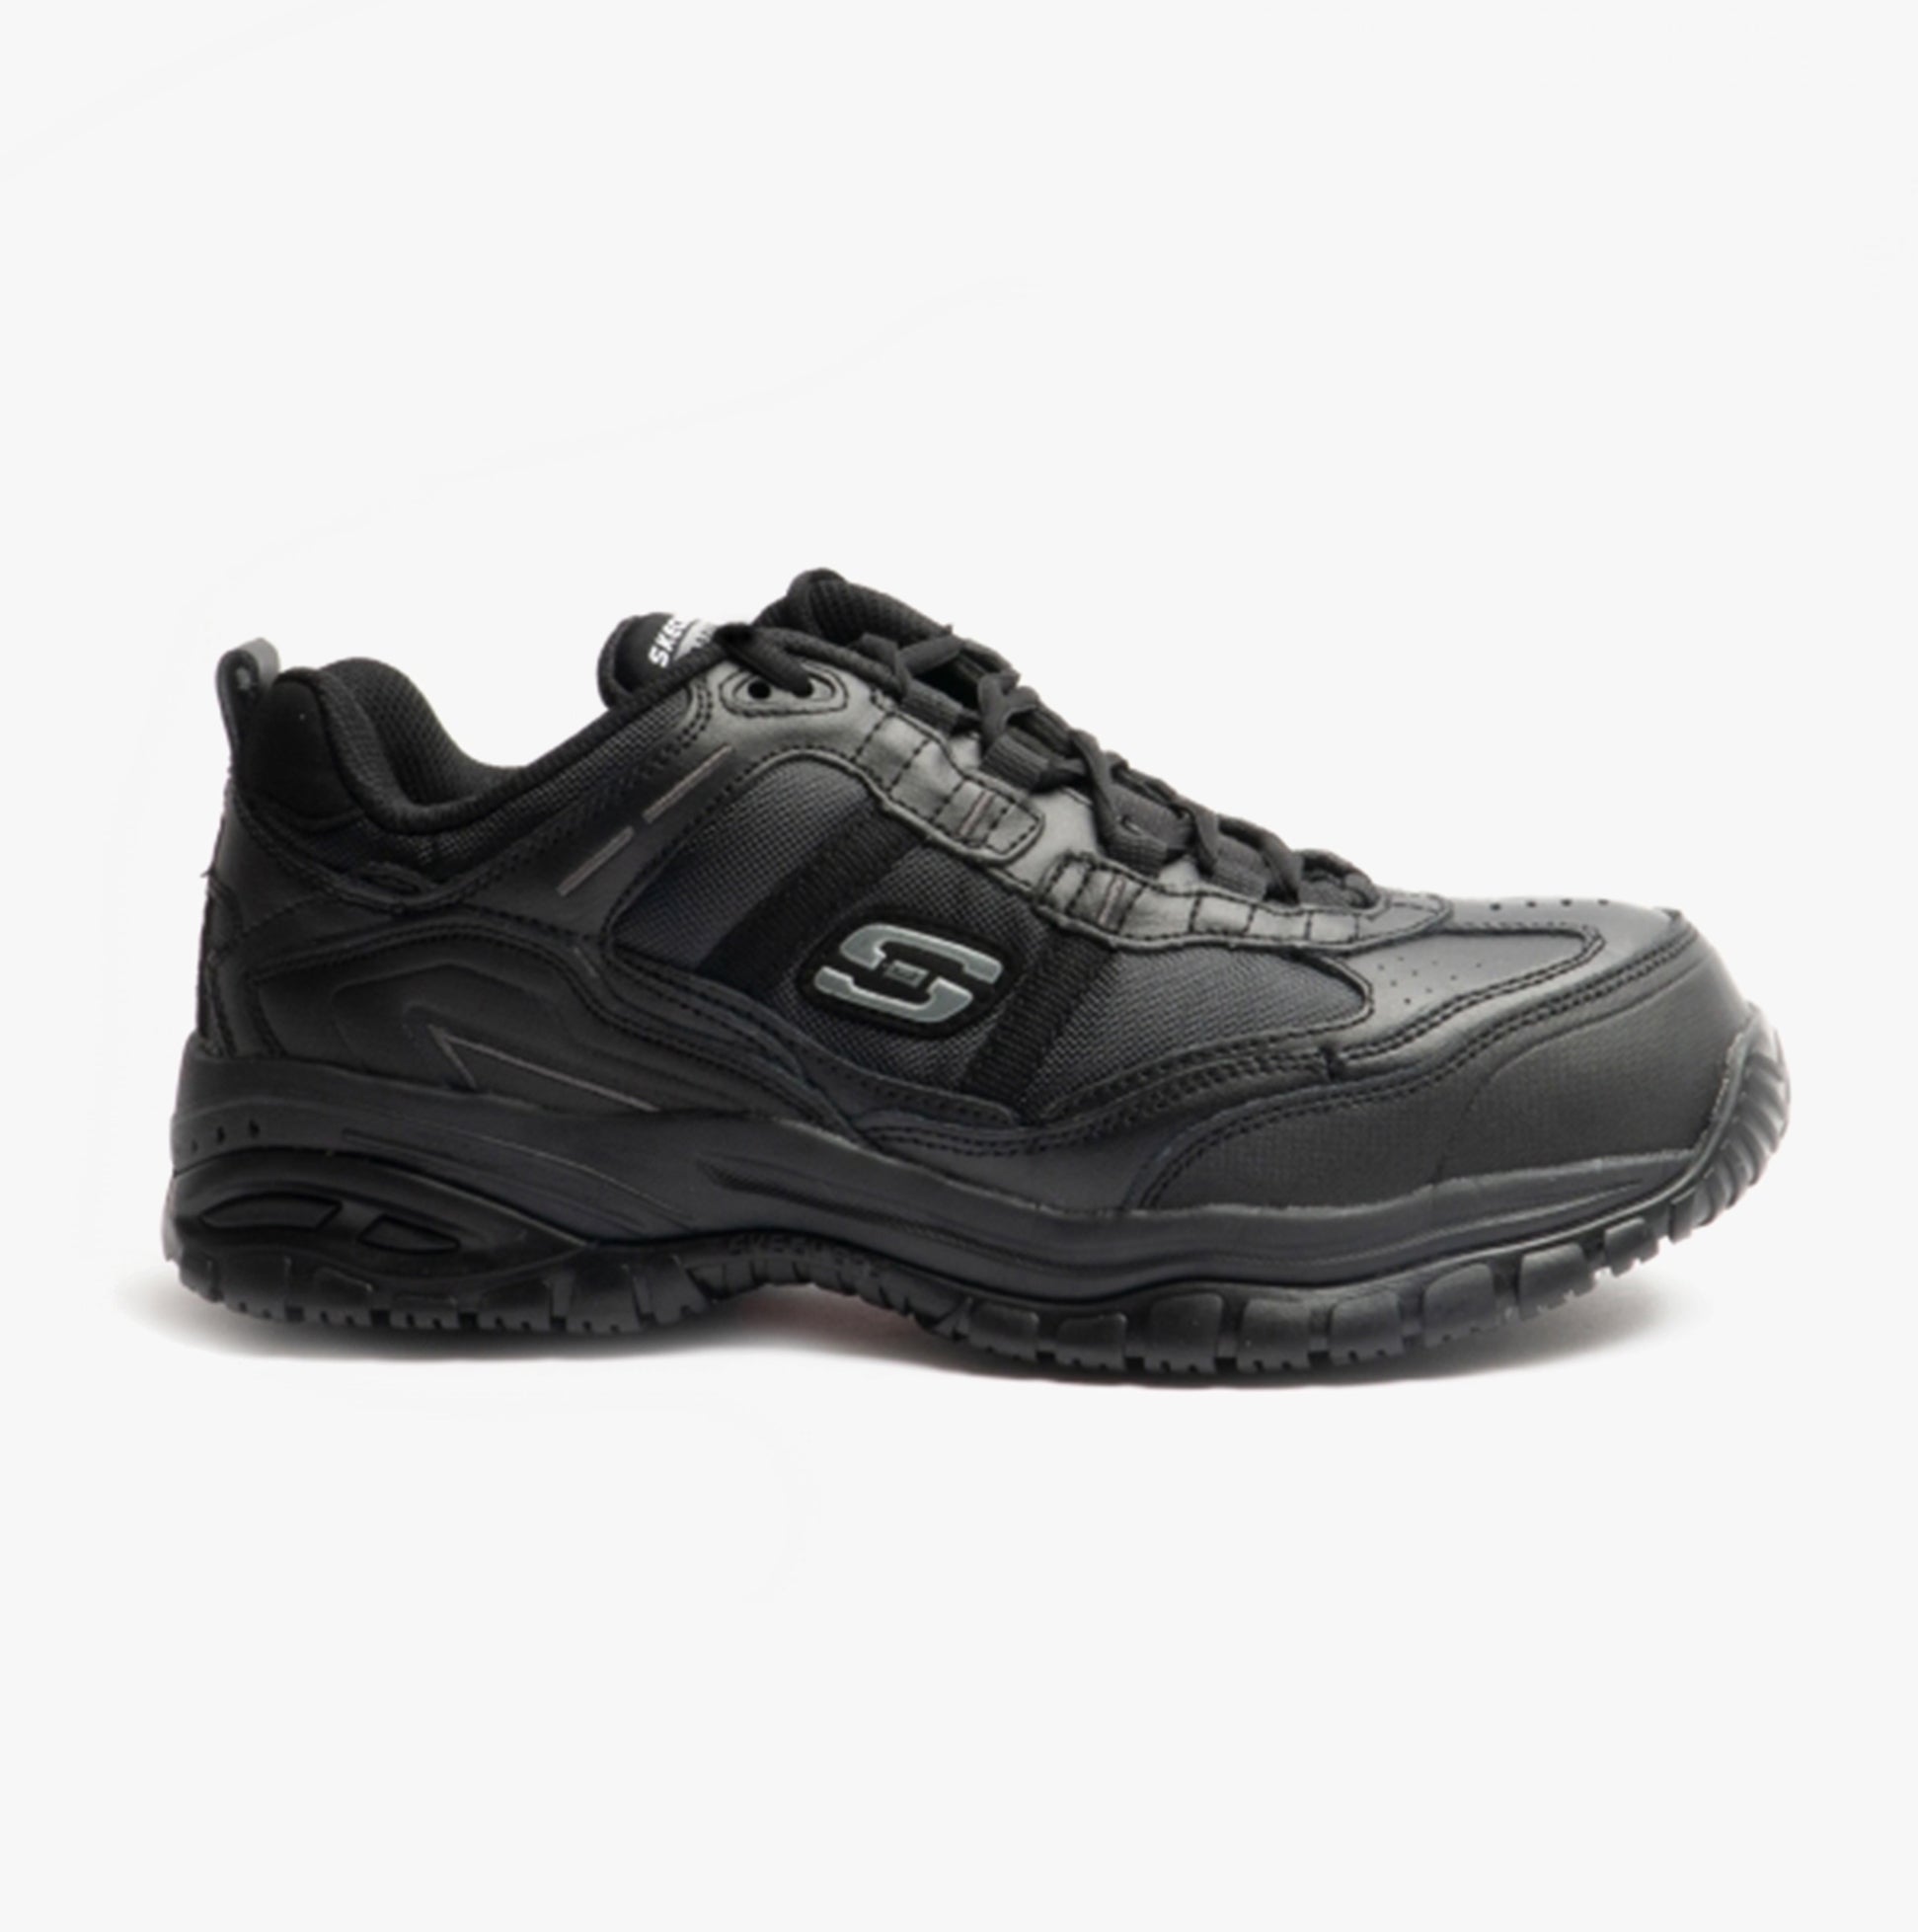 Skechers Work RELAXED FIT: SOFT STRIDE - GRINNEL Mens Safety Trainers ...